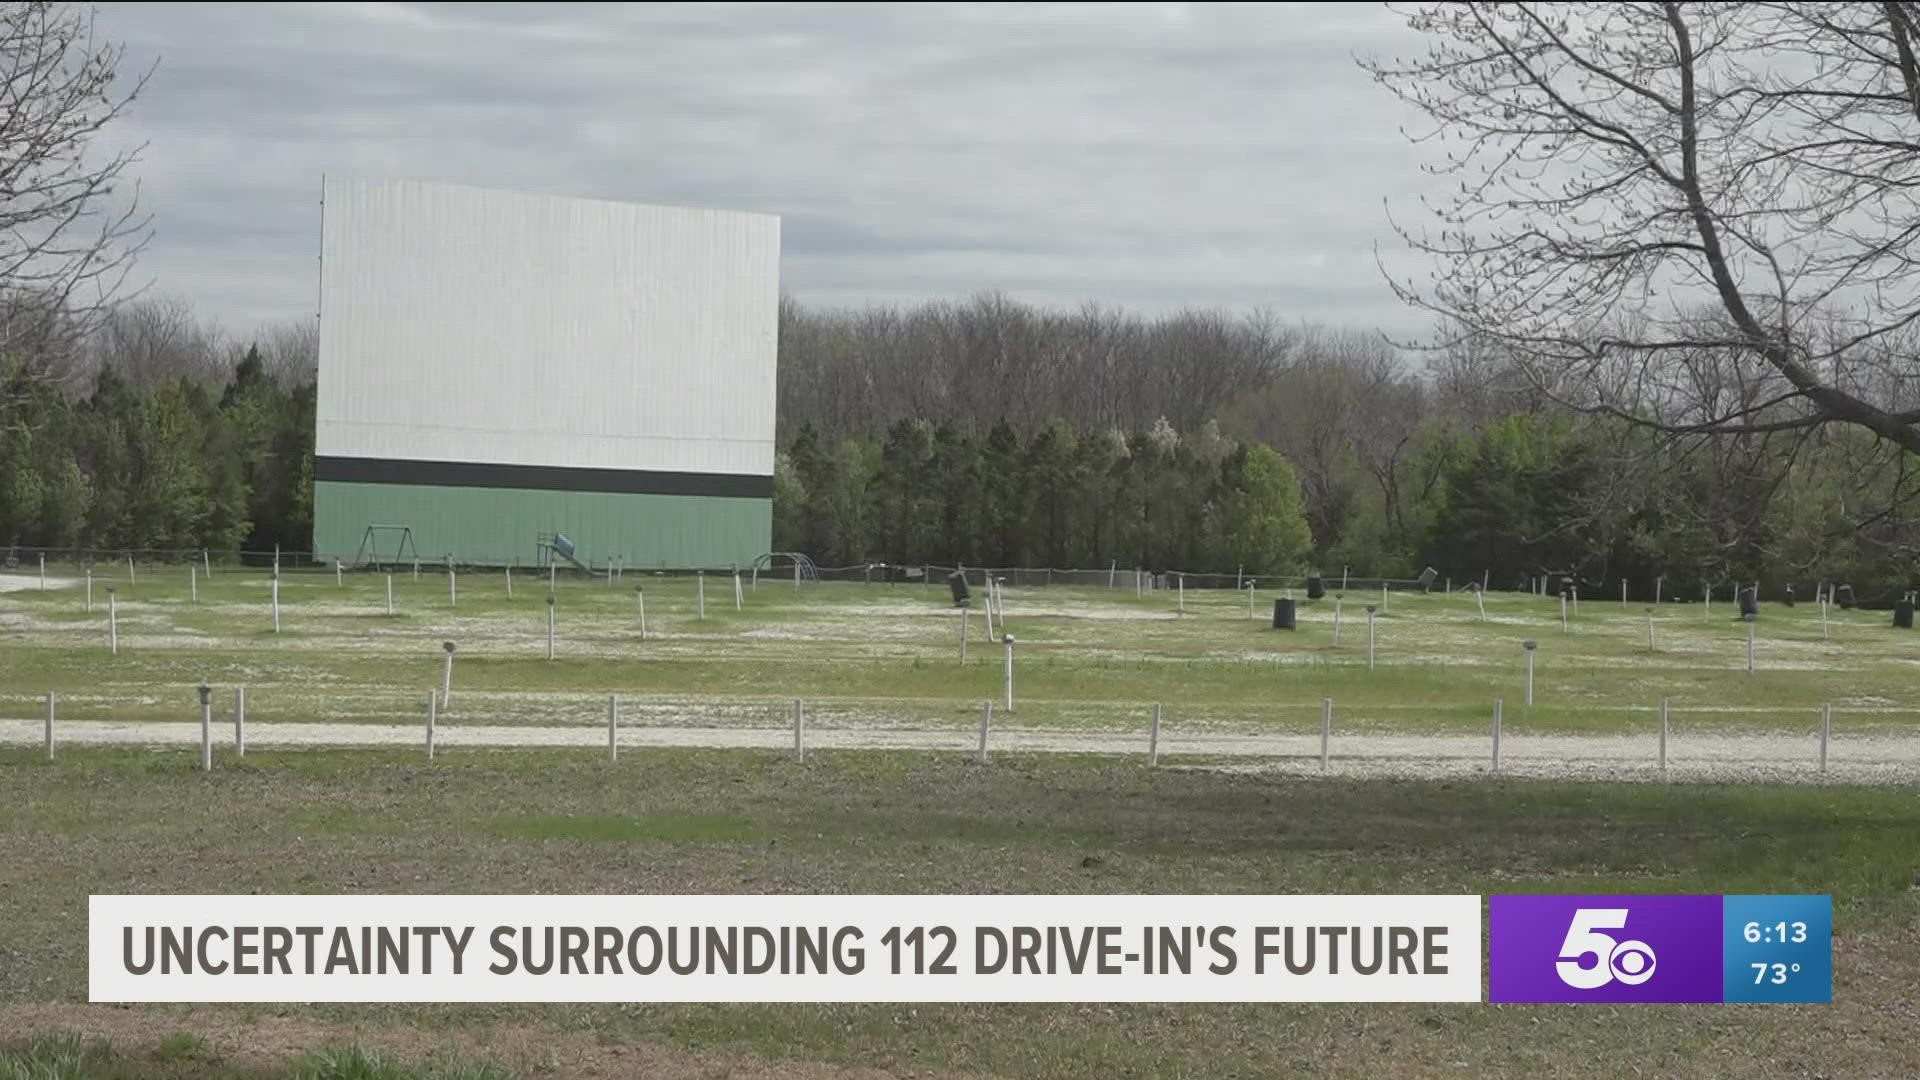 On Friday night, April 15, the movie projector at the 112 Drive-In started for the 32nd season, and this season could be the last time the big-screen drive-in opens.